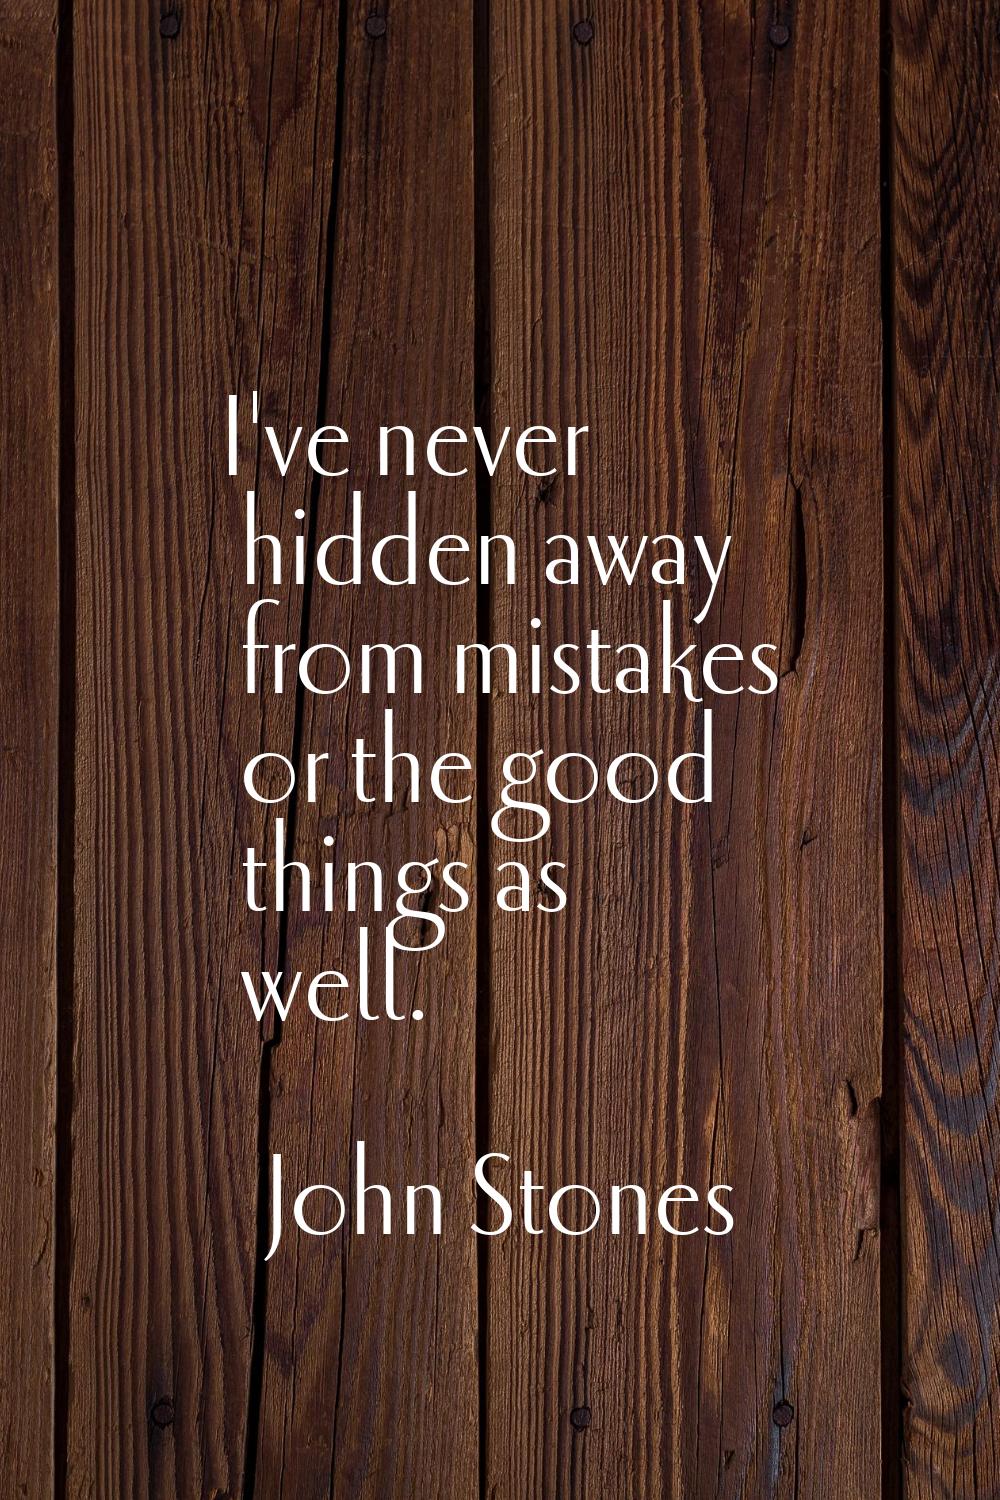 I've never hidden away from mistakes or the good things as well.